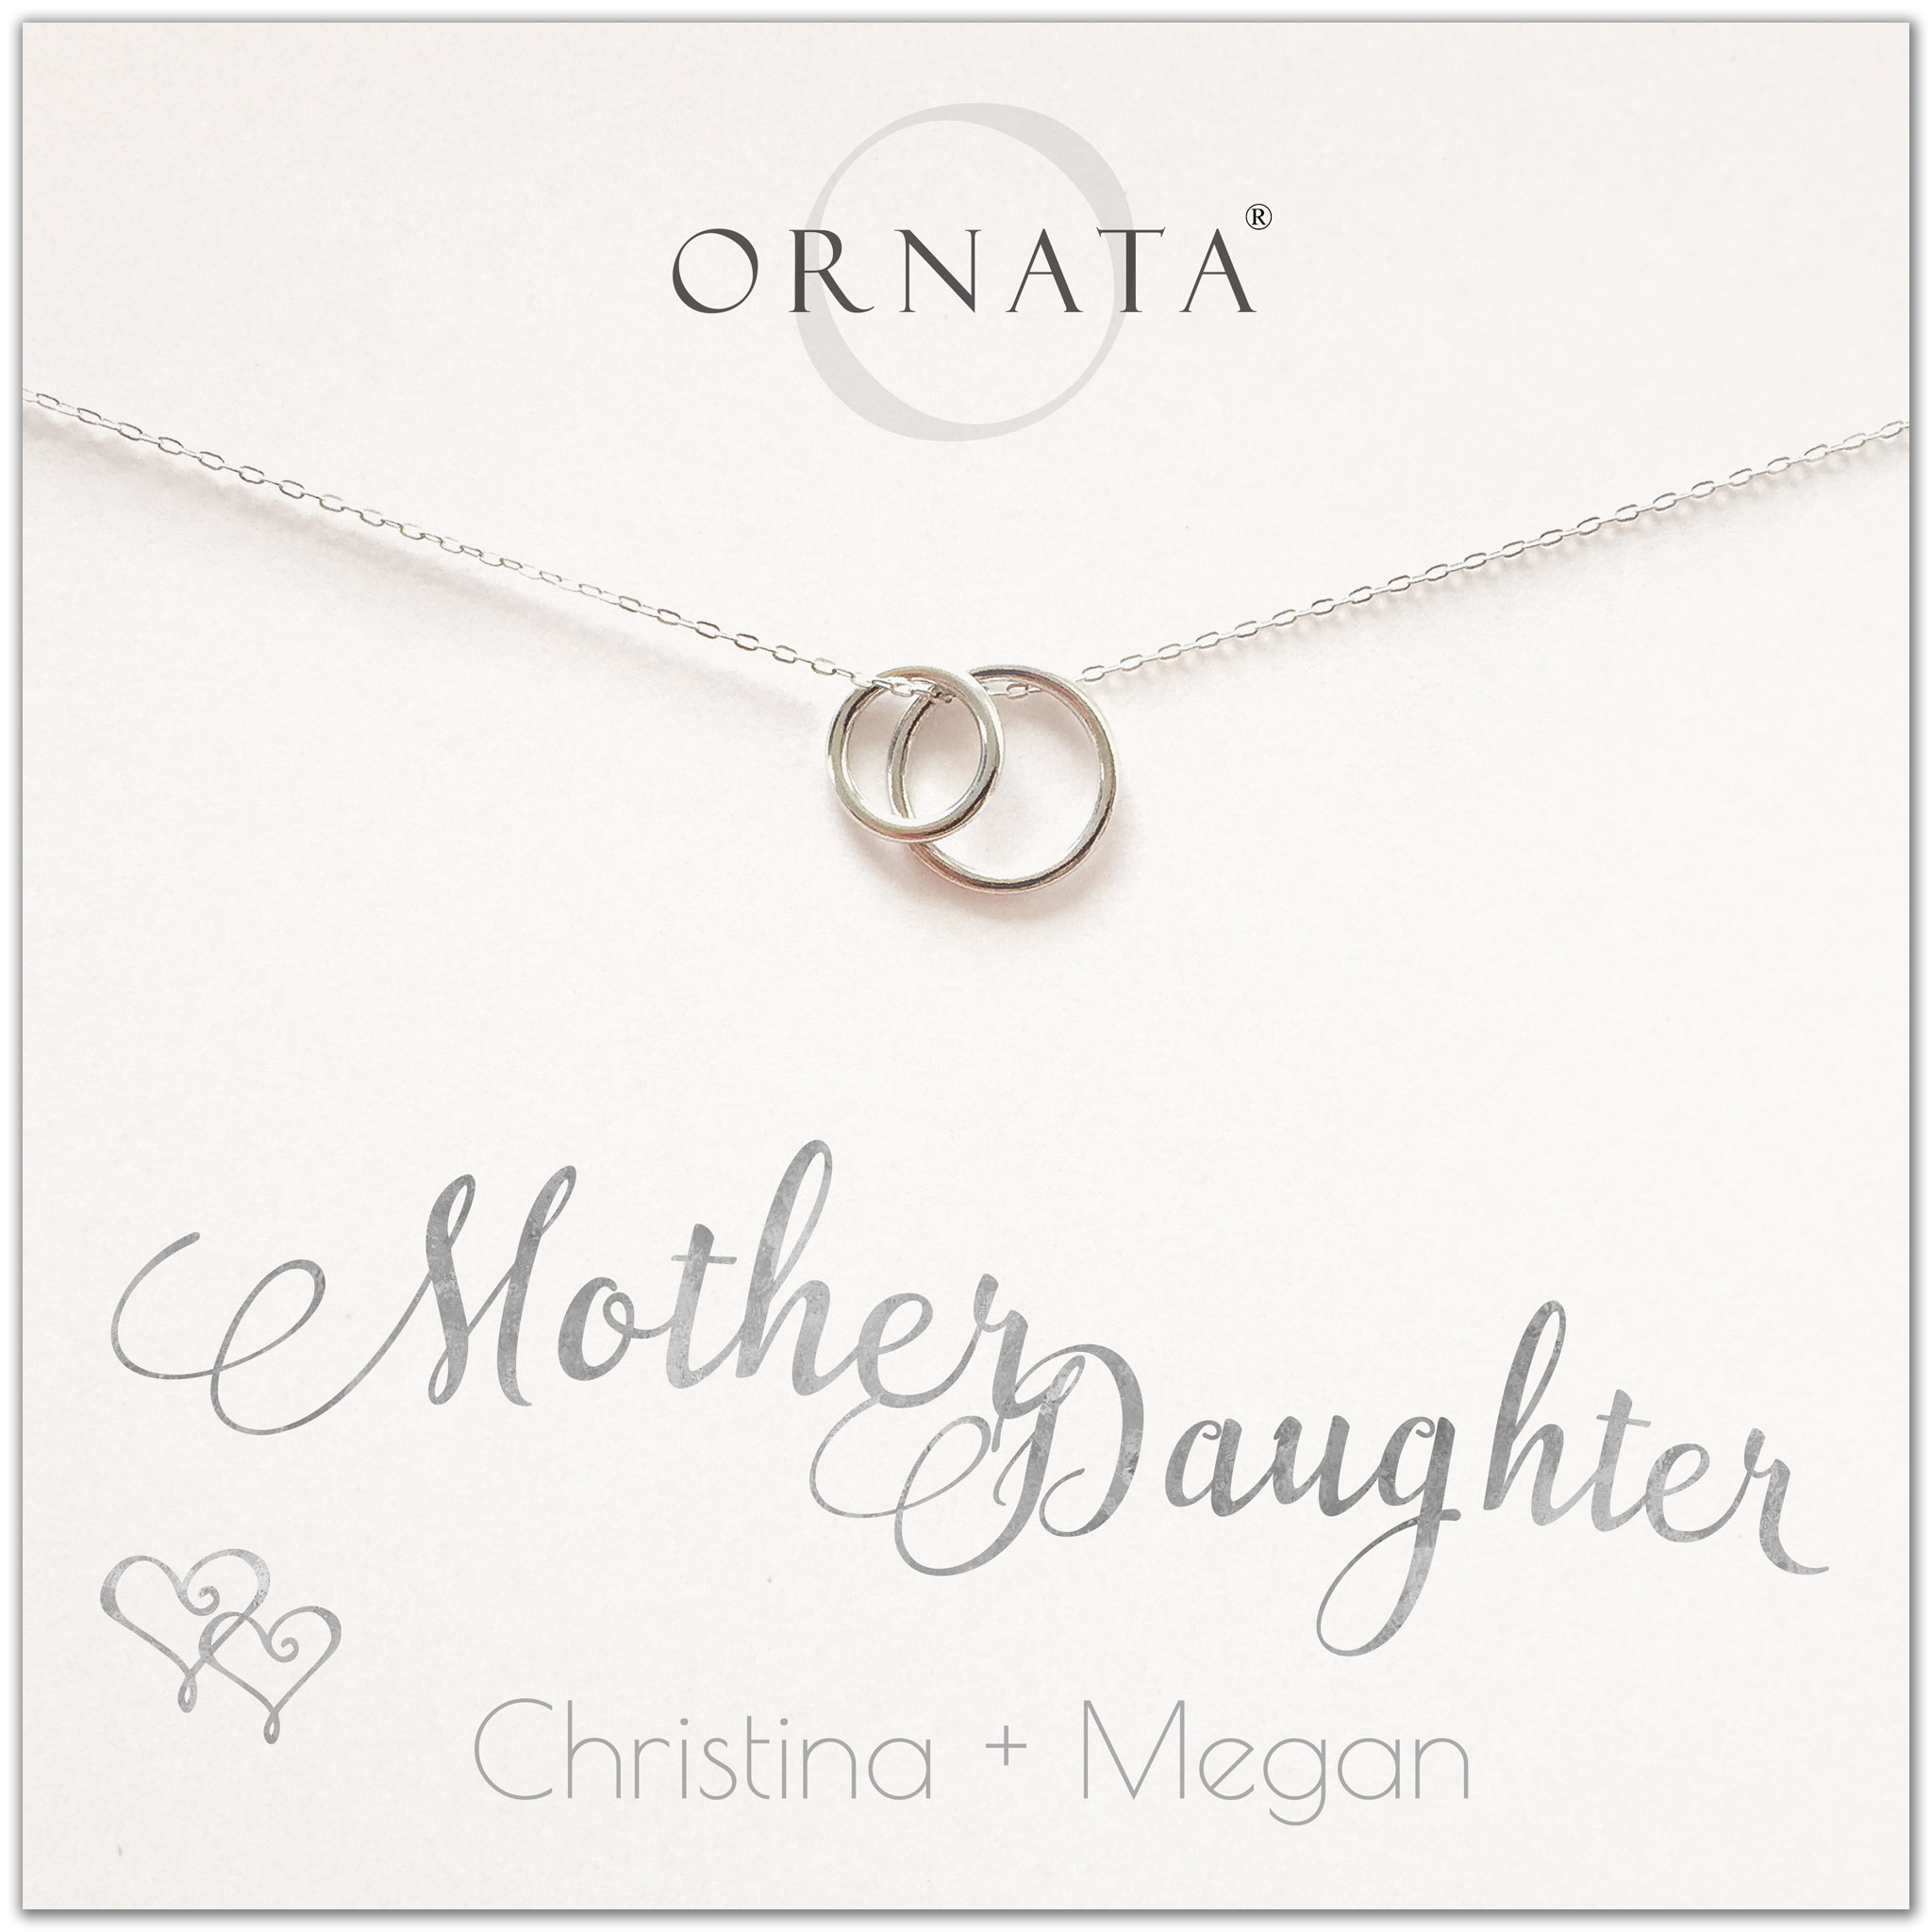 Adorable Mother-Daughter Necklaces, Perfect for Matching! Get the Set Gift  | eBay